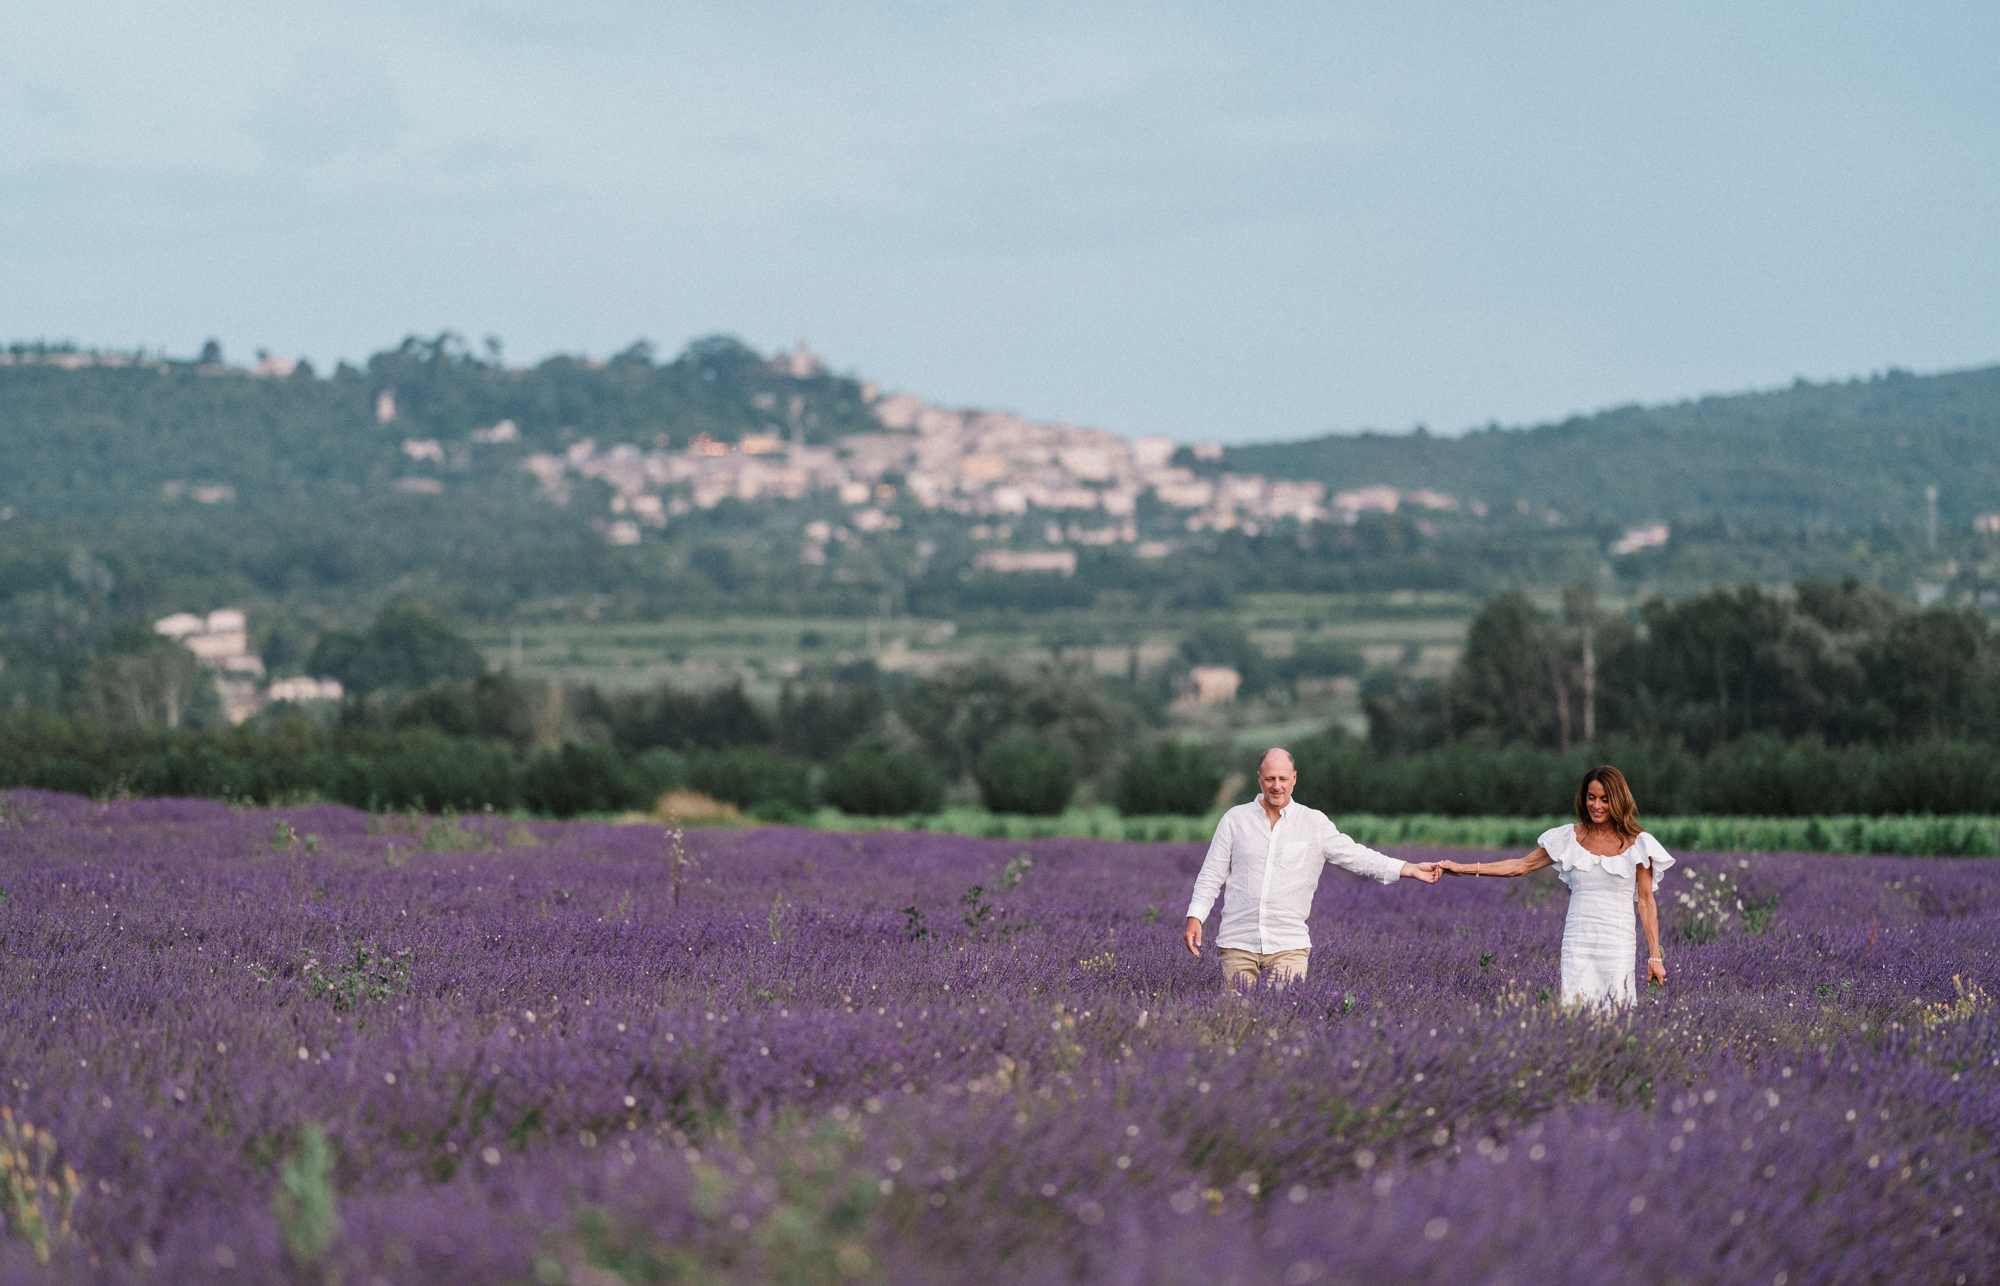 couple walking in lavender field with village in the background